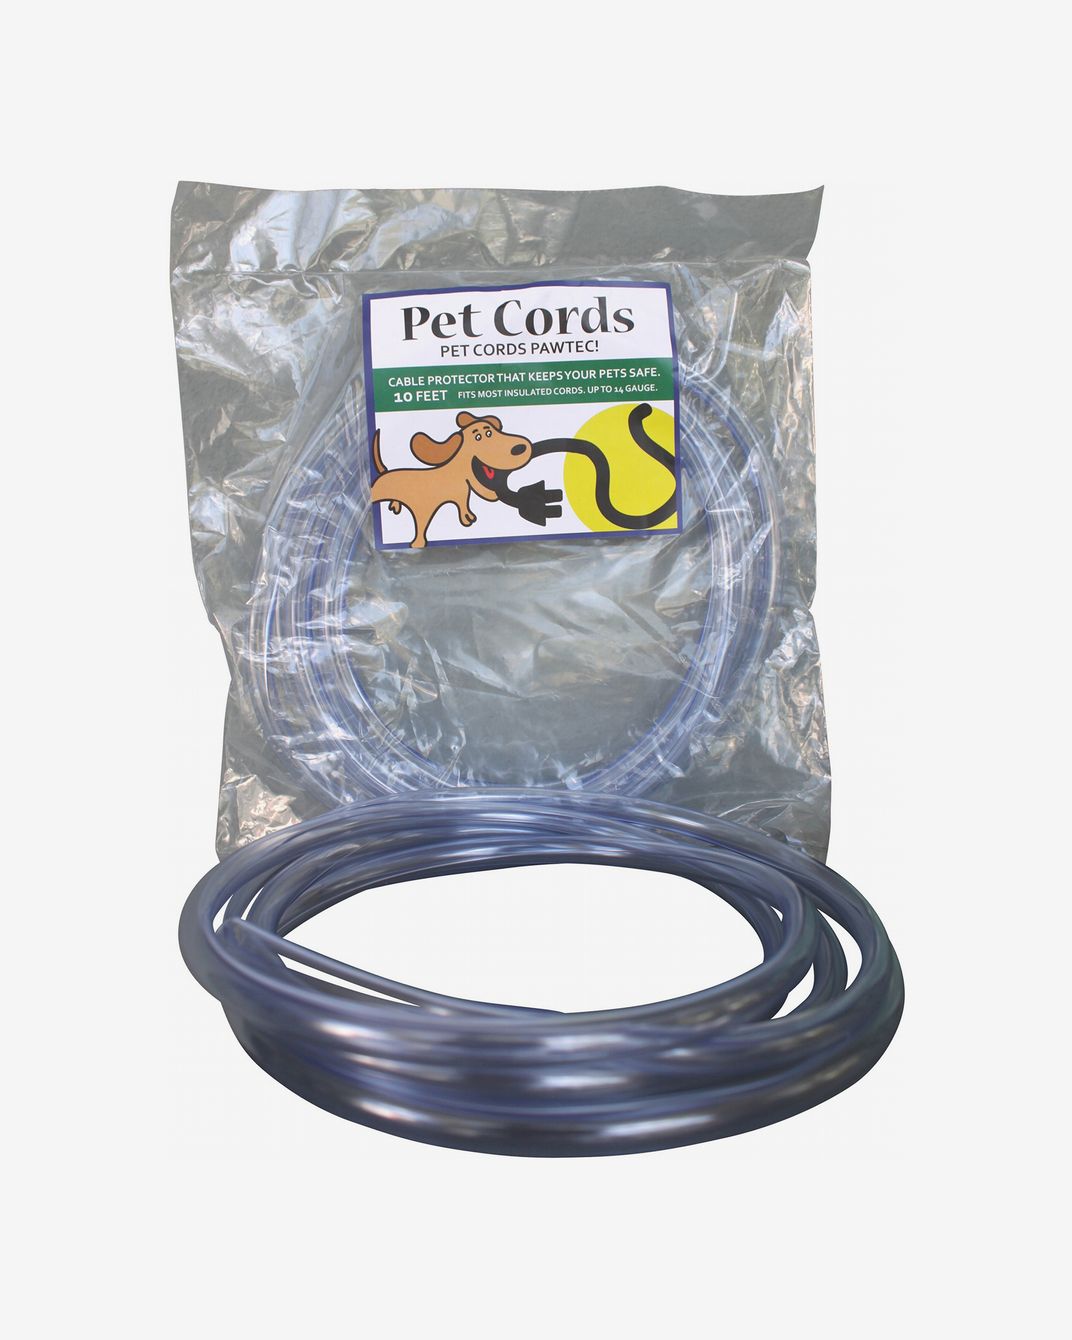 PetCords Dog and Cat Cord Protector Review 2020